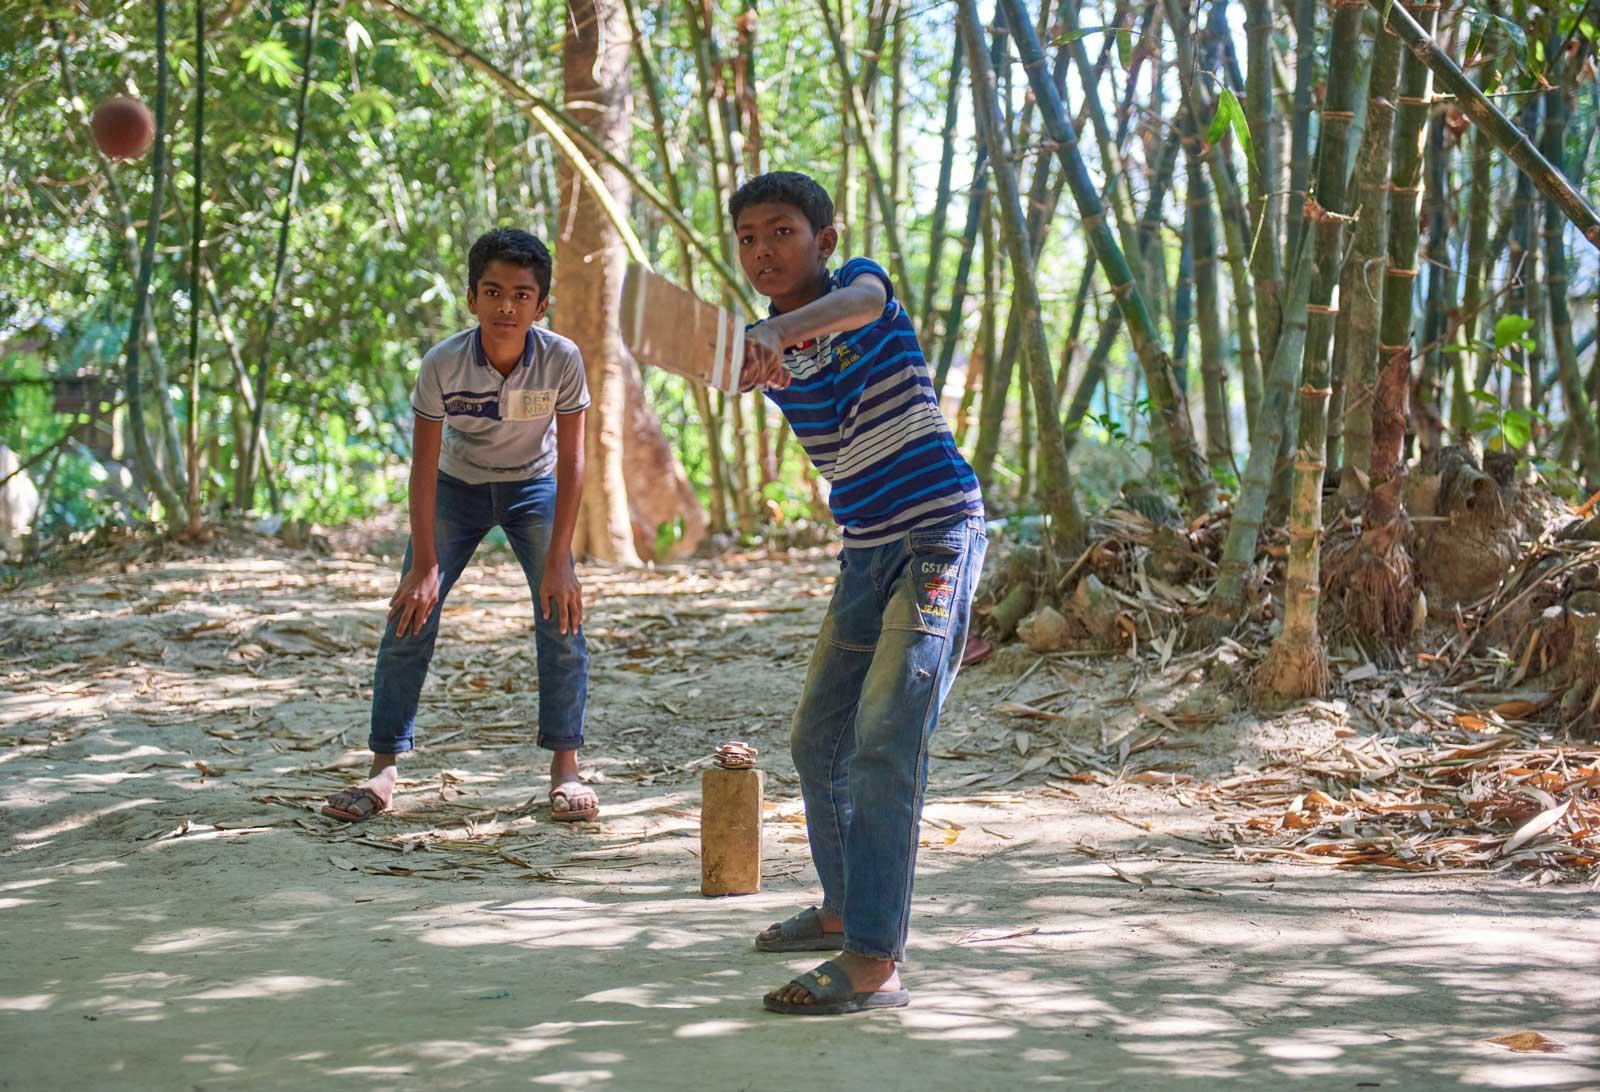 Two boys playing cricket.